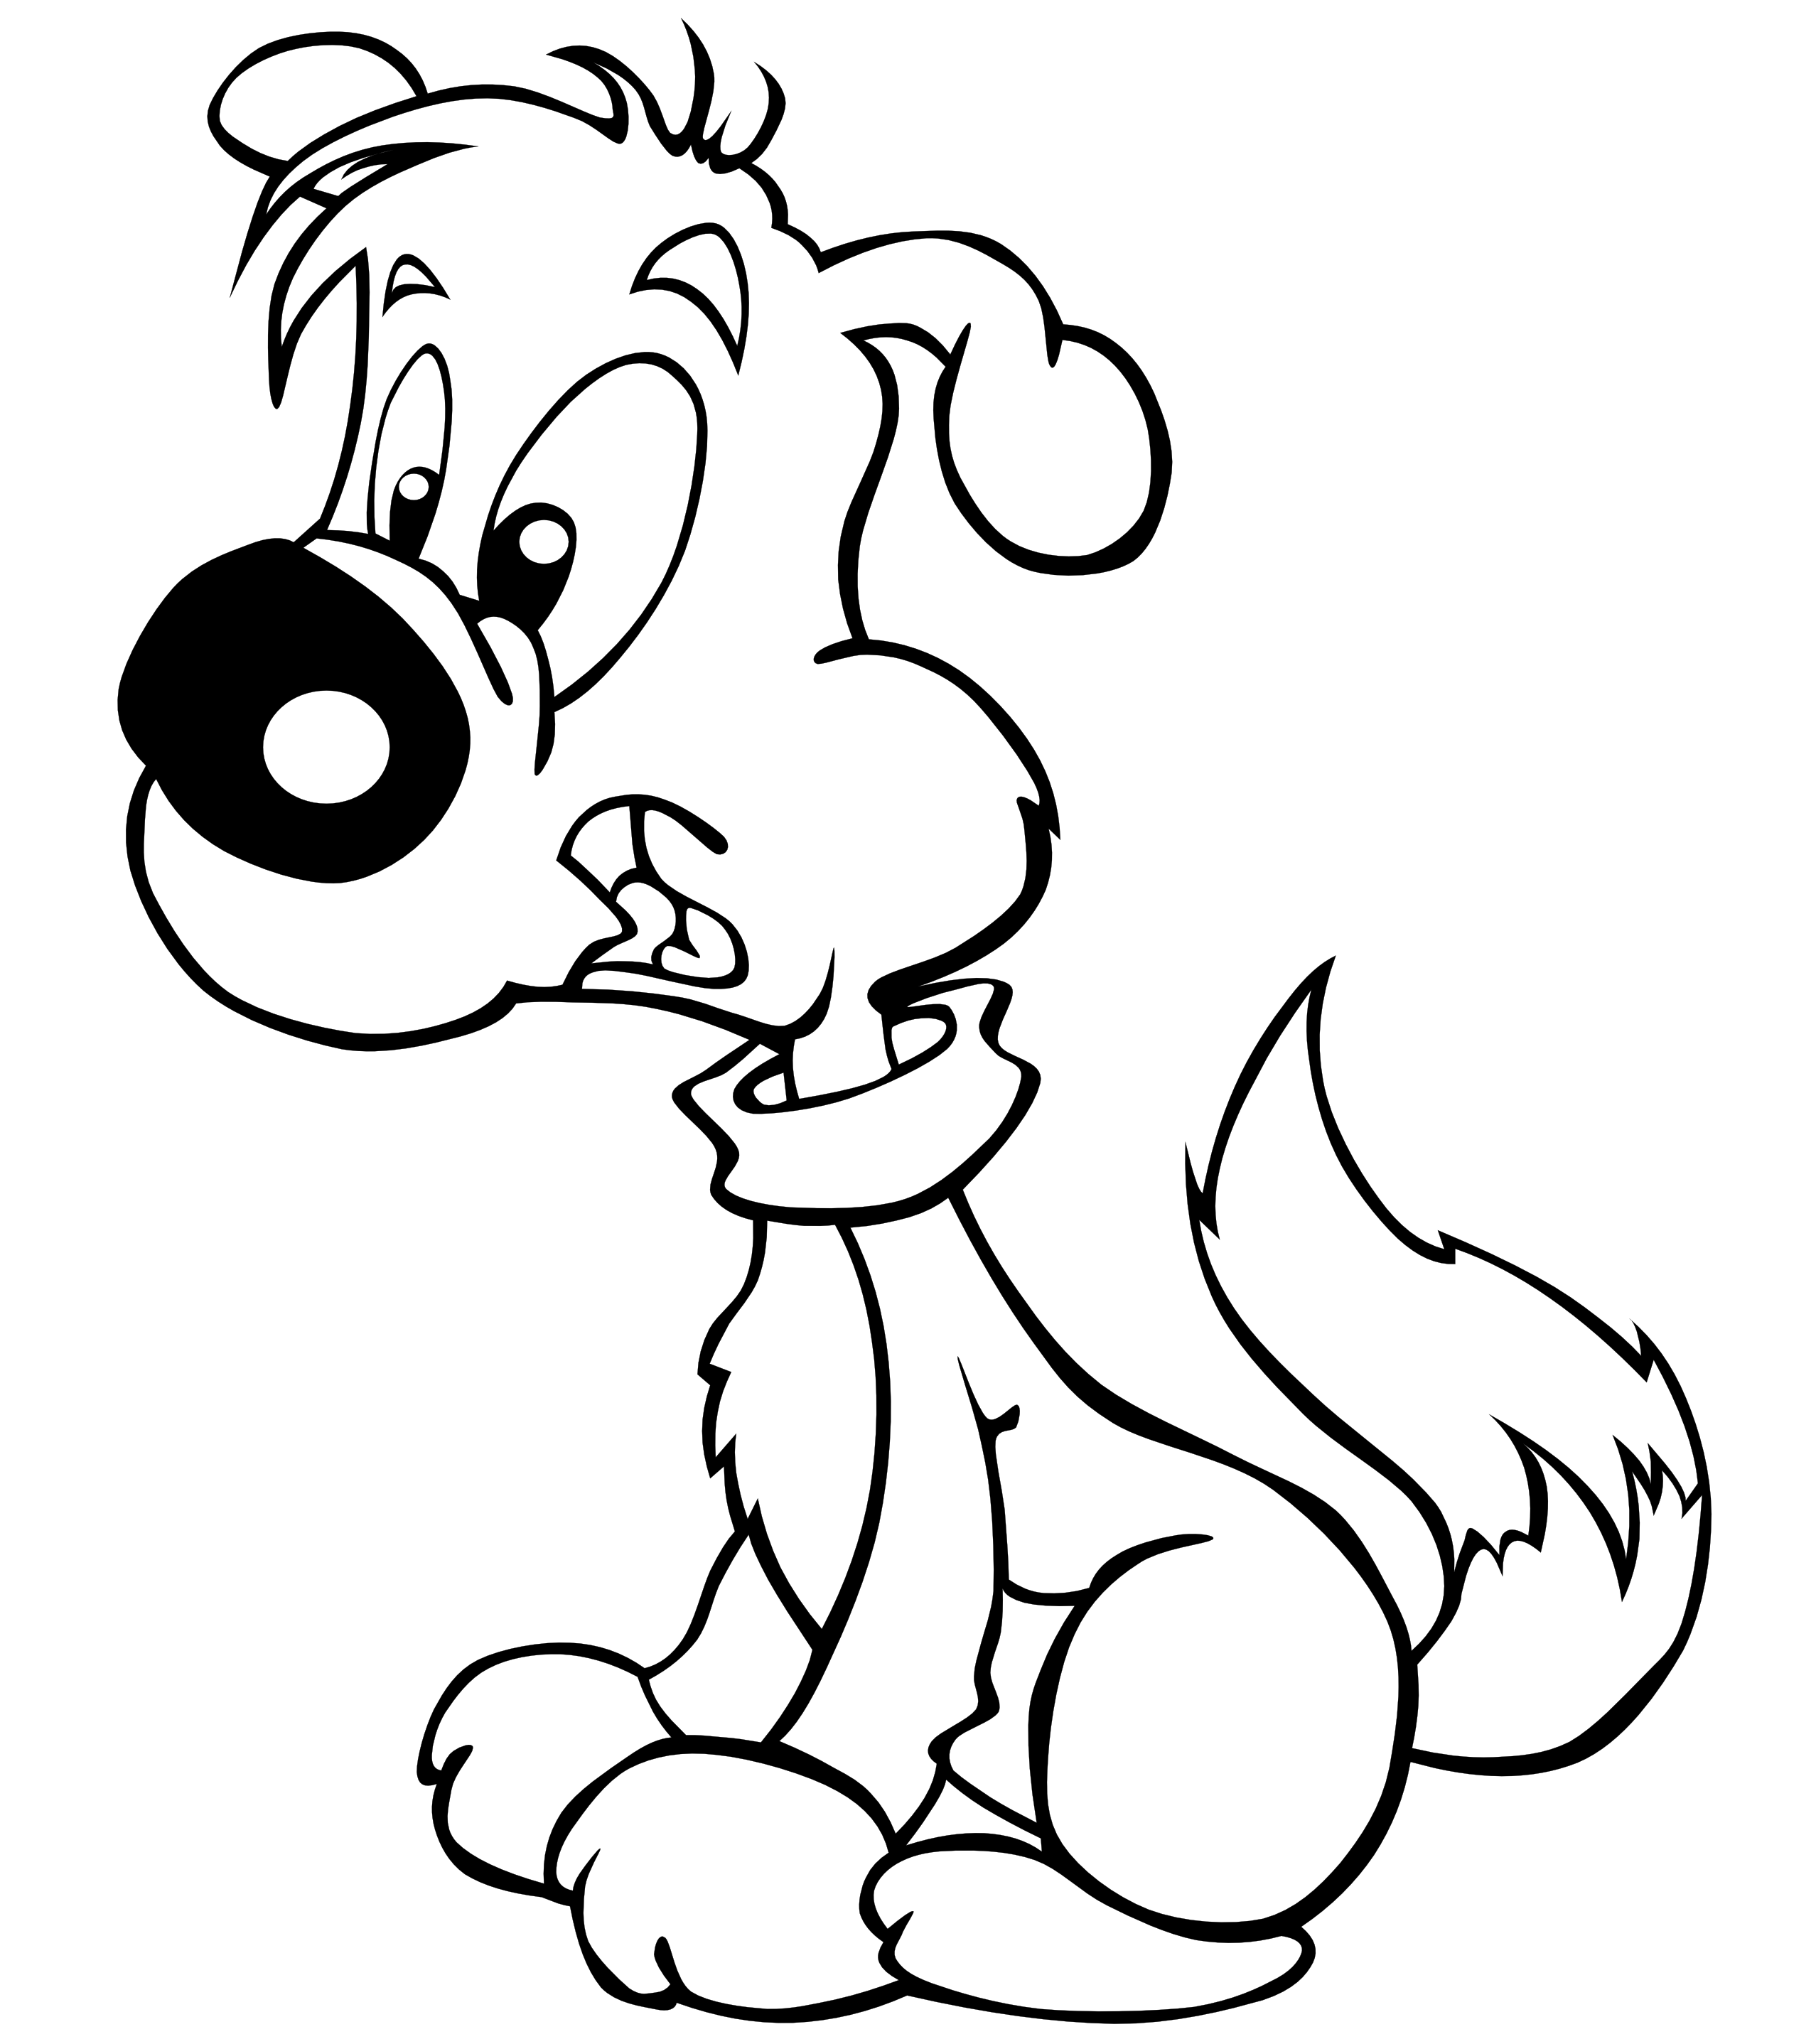 Free Cartoon Clipart Black And White, Download Free Cartoon Clipart Black  And White png images, Free ClipArts on Clipart Library